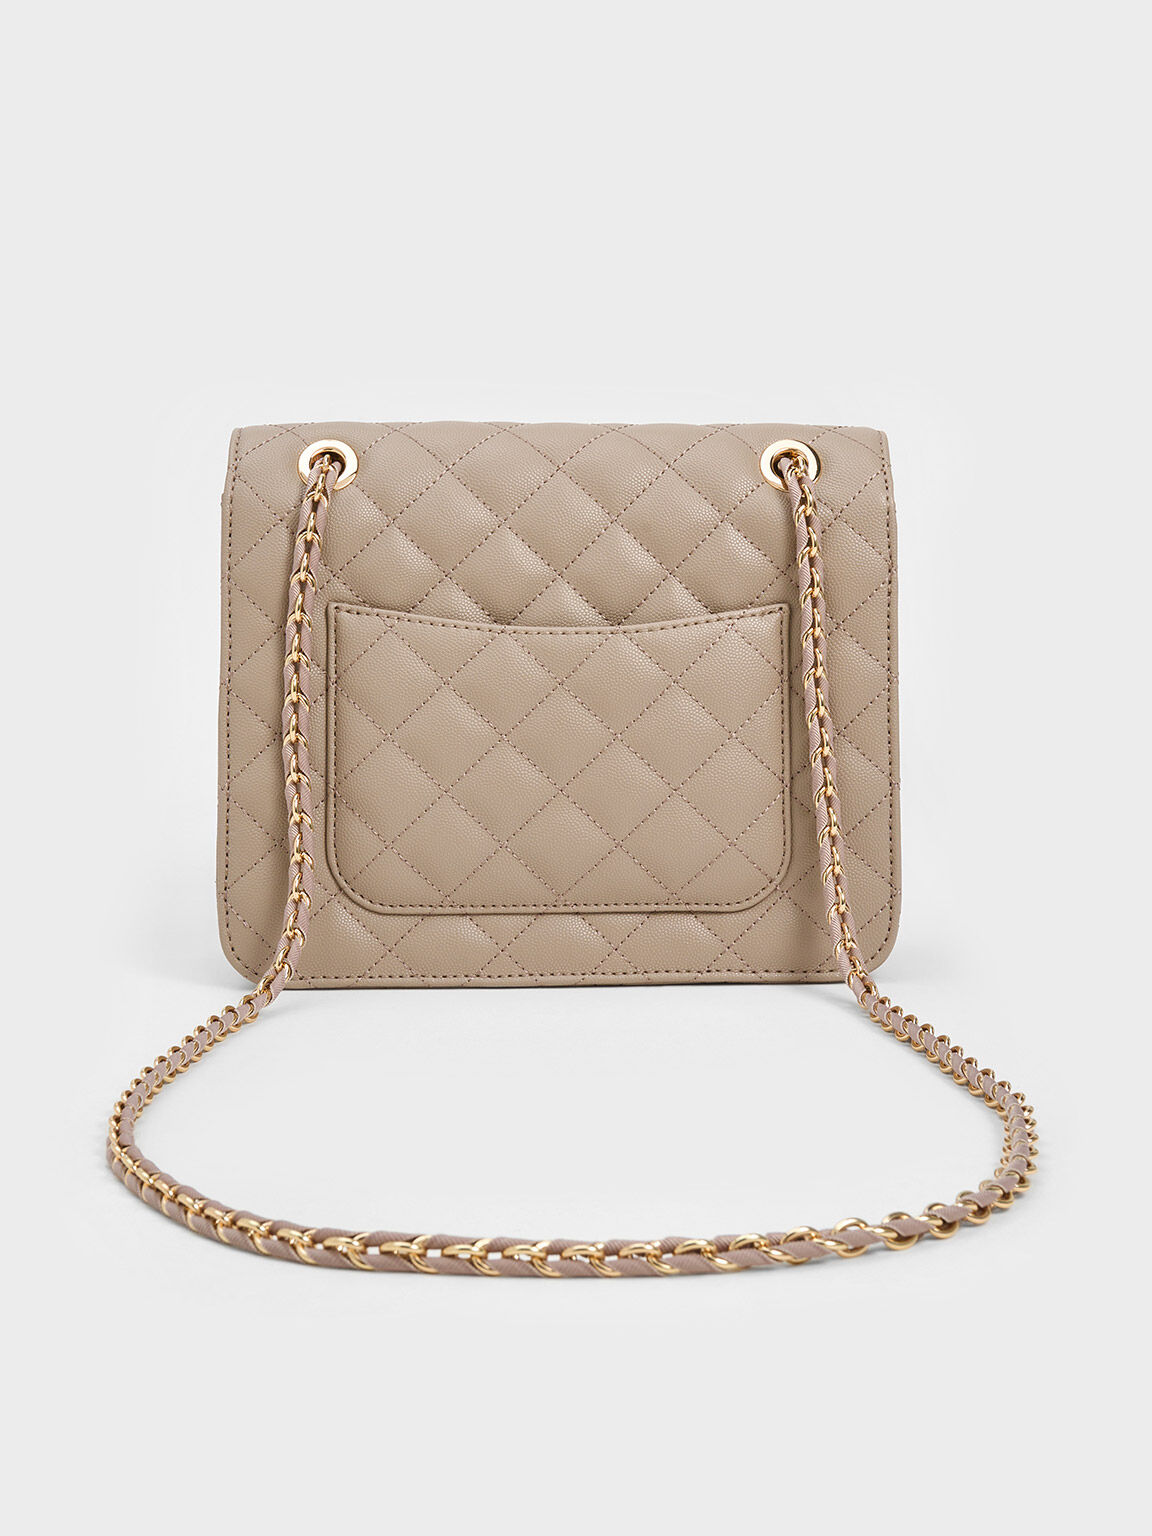 Taupe Cressida Quilted Chain Strap Bag - CHARLES & KEITH PH